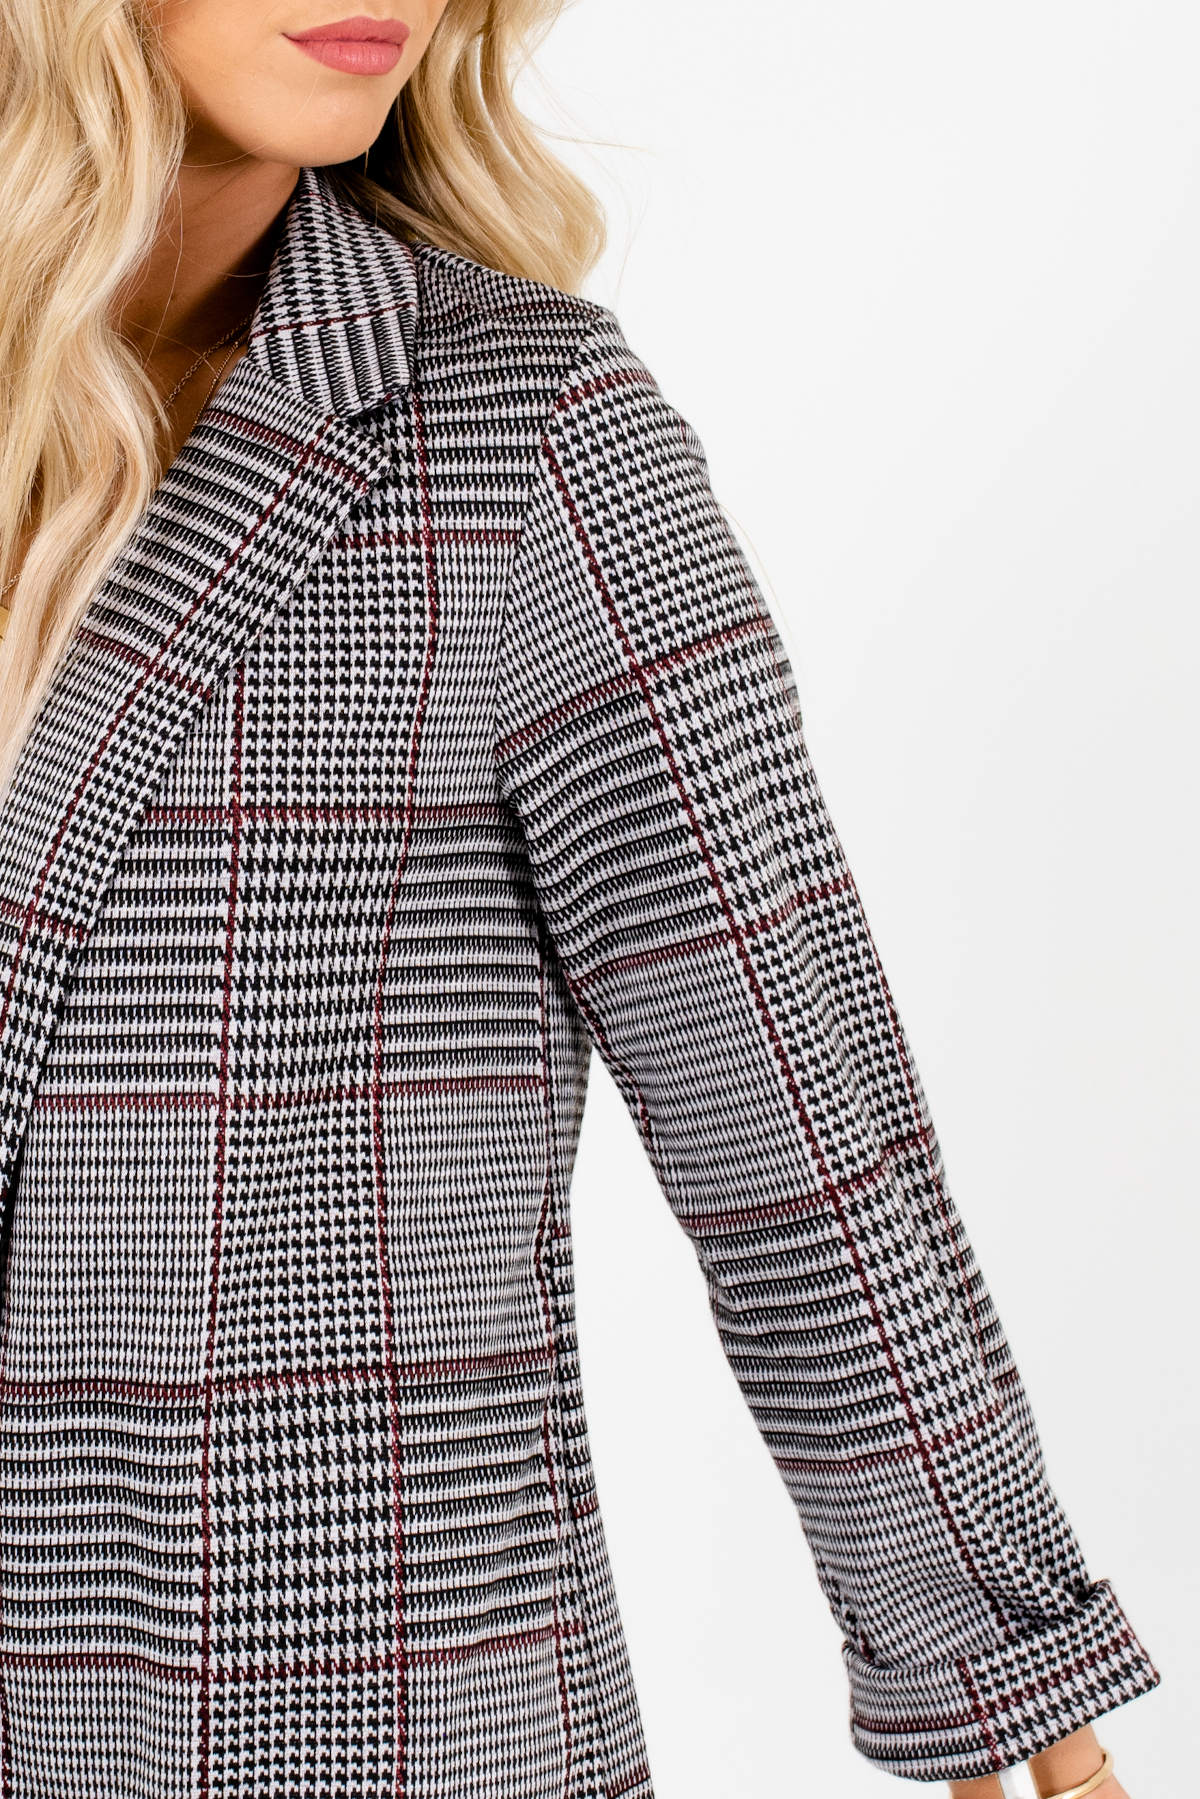 Gray Houndstooth Plaid Blazers Affordable Online Boutique